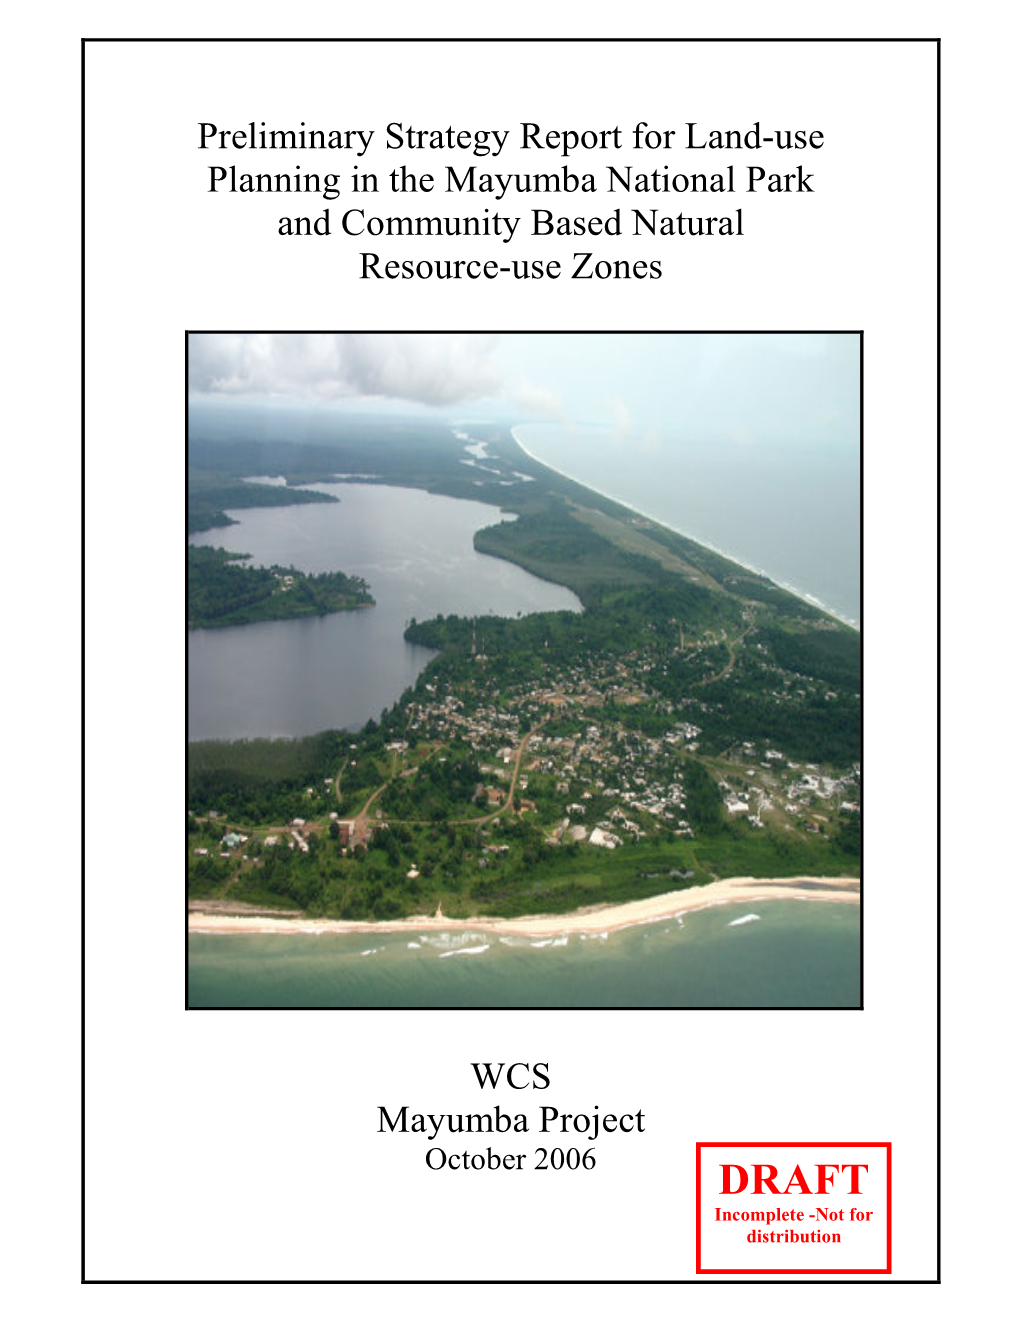 Preliminary Strategy Report for Land-Use Planning in the Mayumba National Park and Community Based Natural Resource-Use Zones